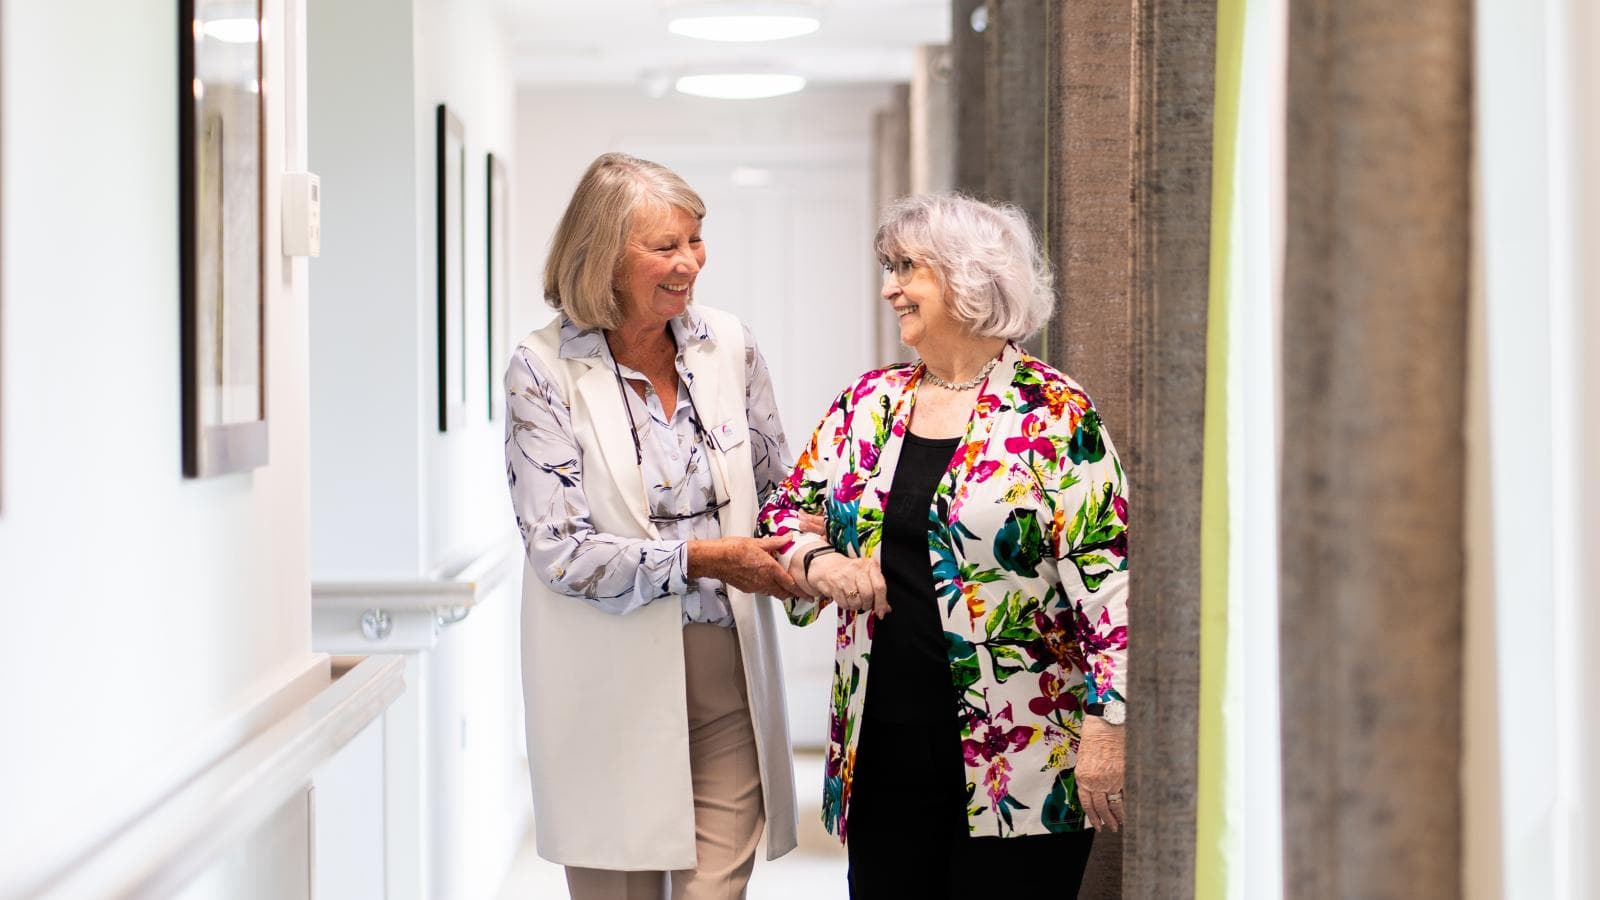 Two older ladies linking arms walking down a corridor